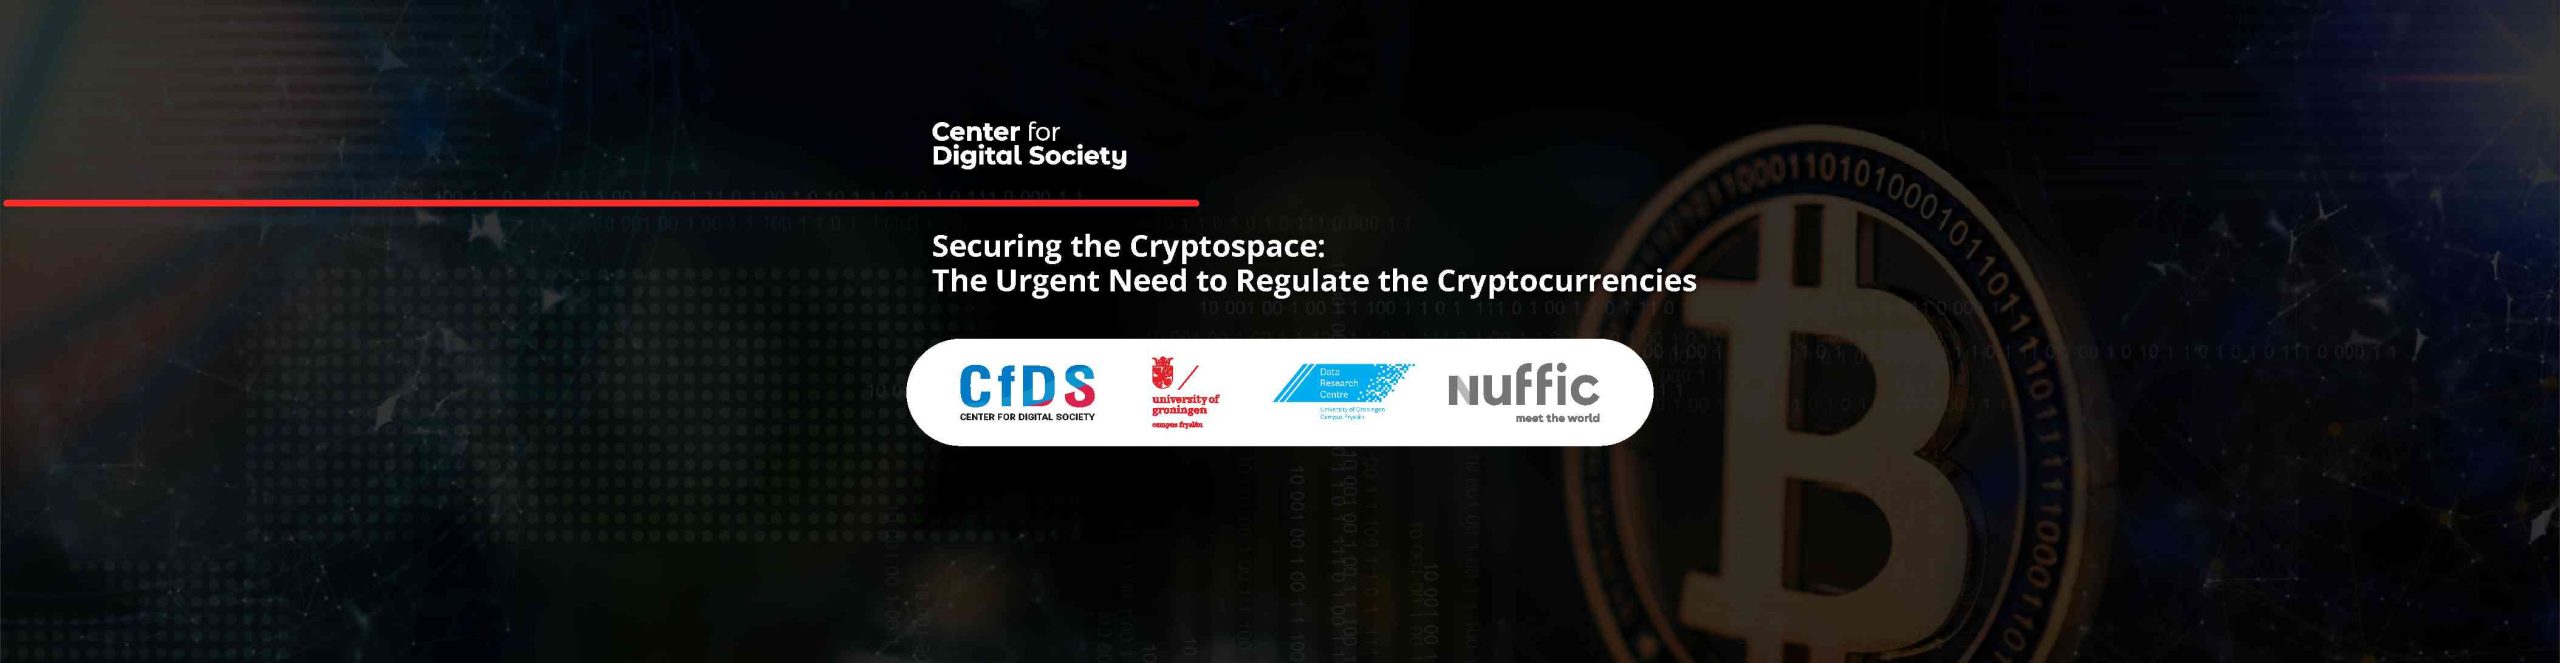 Securing the Cryptospace: The Urgent Need to Regulate the Cryptocurrencies